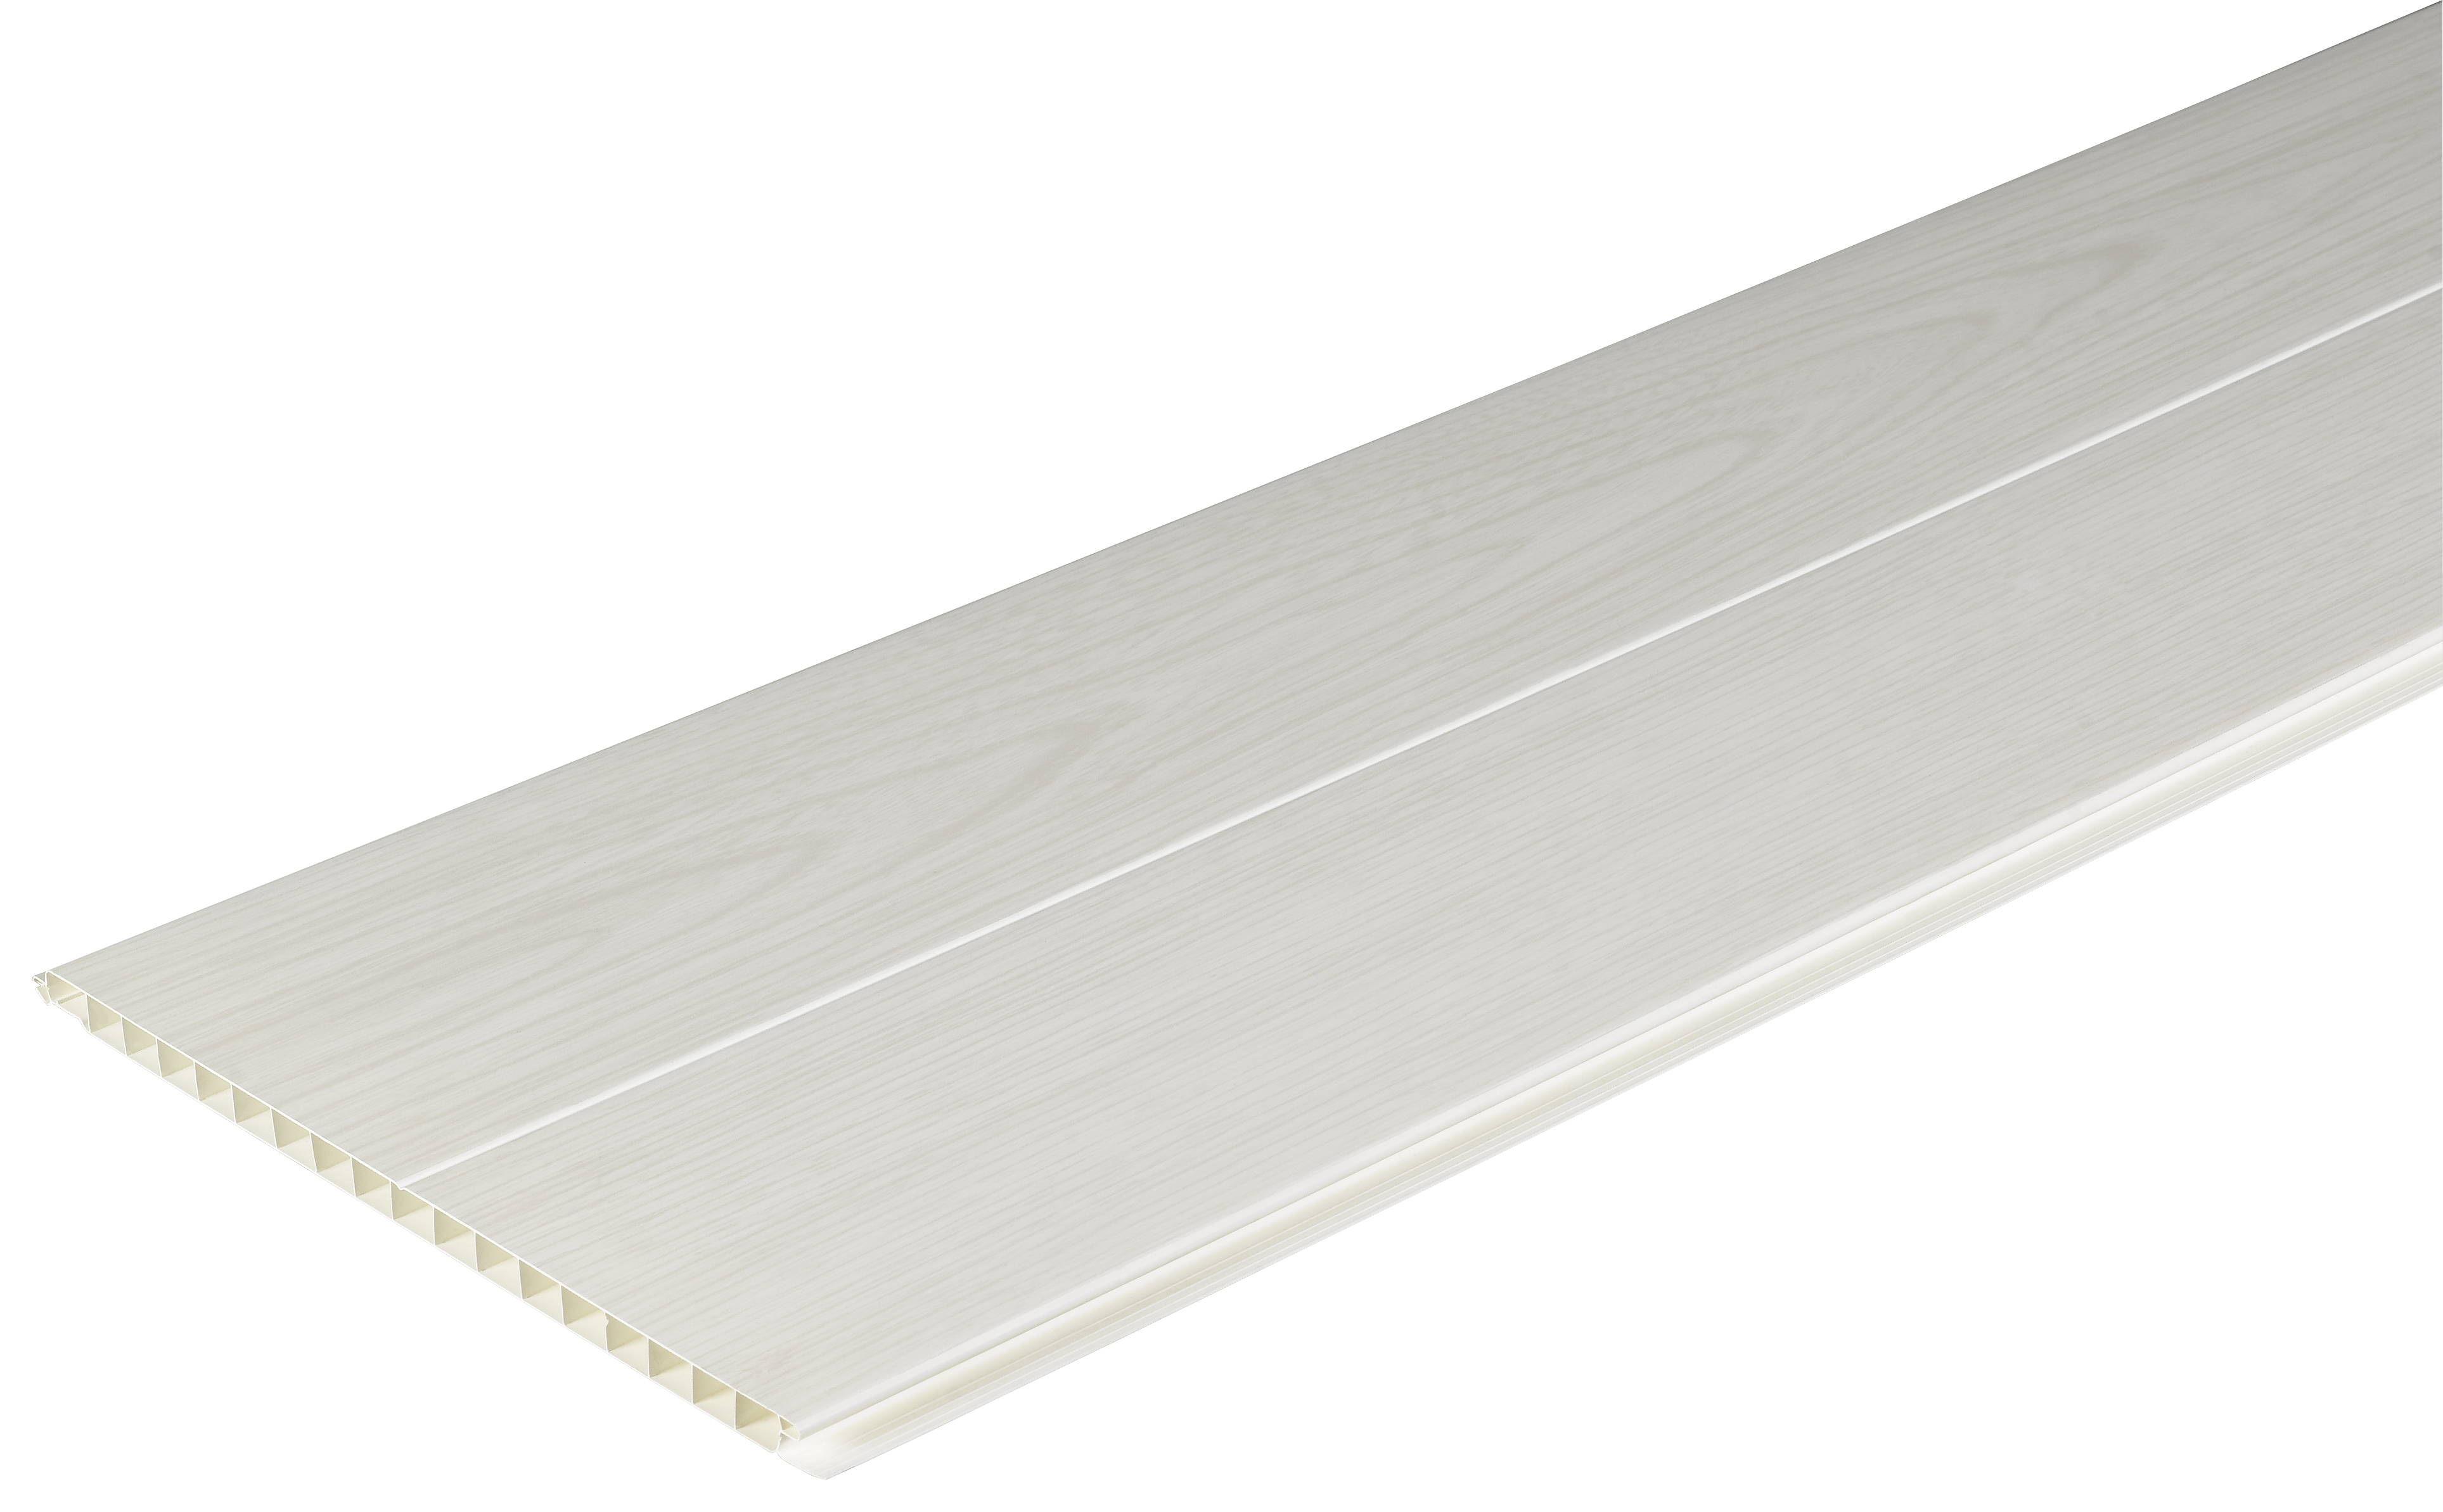 Image of Wickes PVCu White Ash Effect Interior Cladding - 250mm x 2.5m